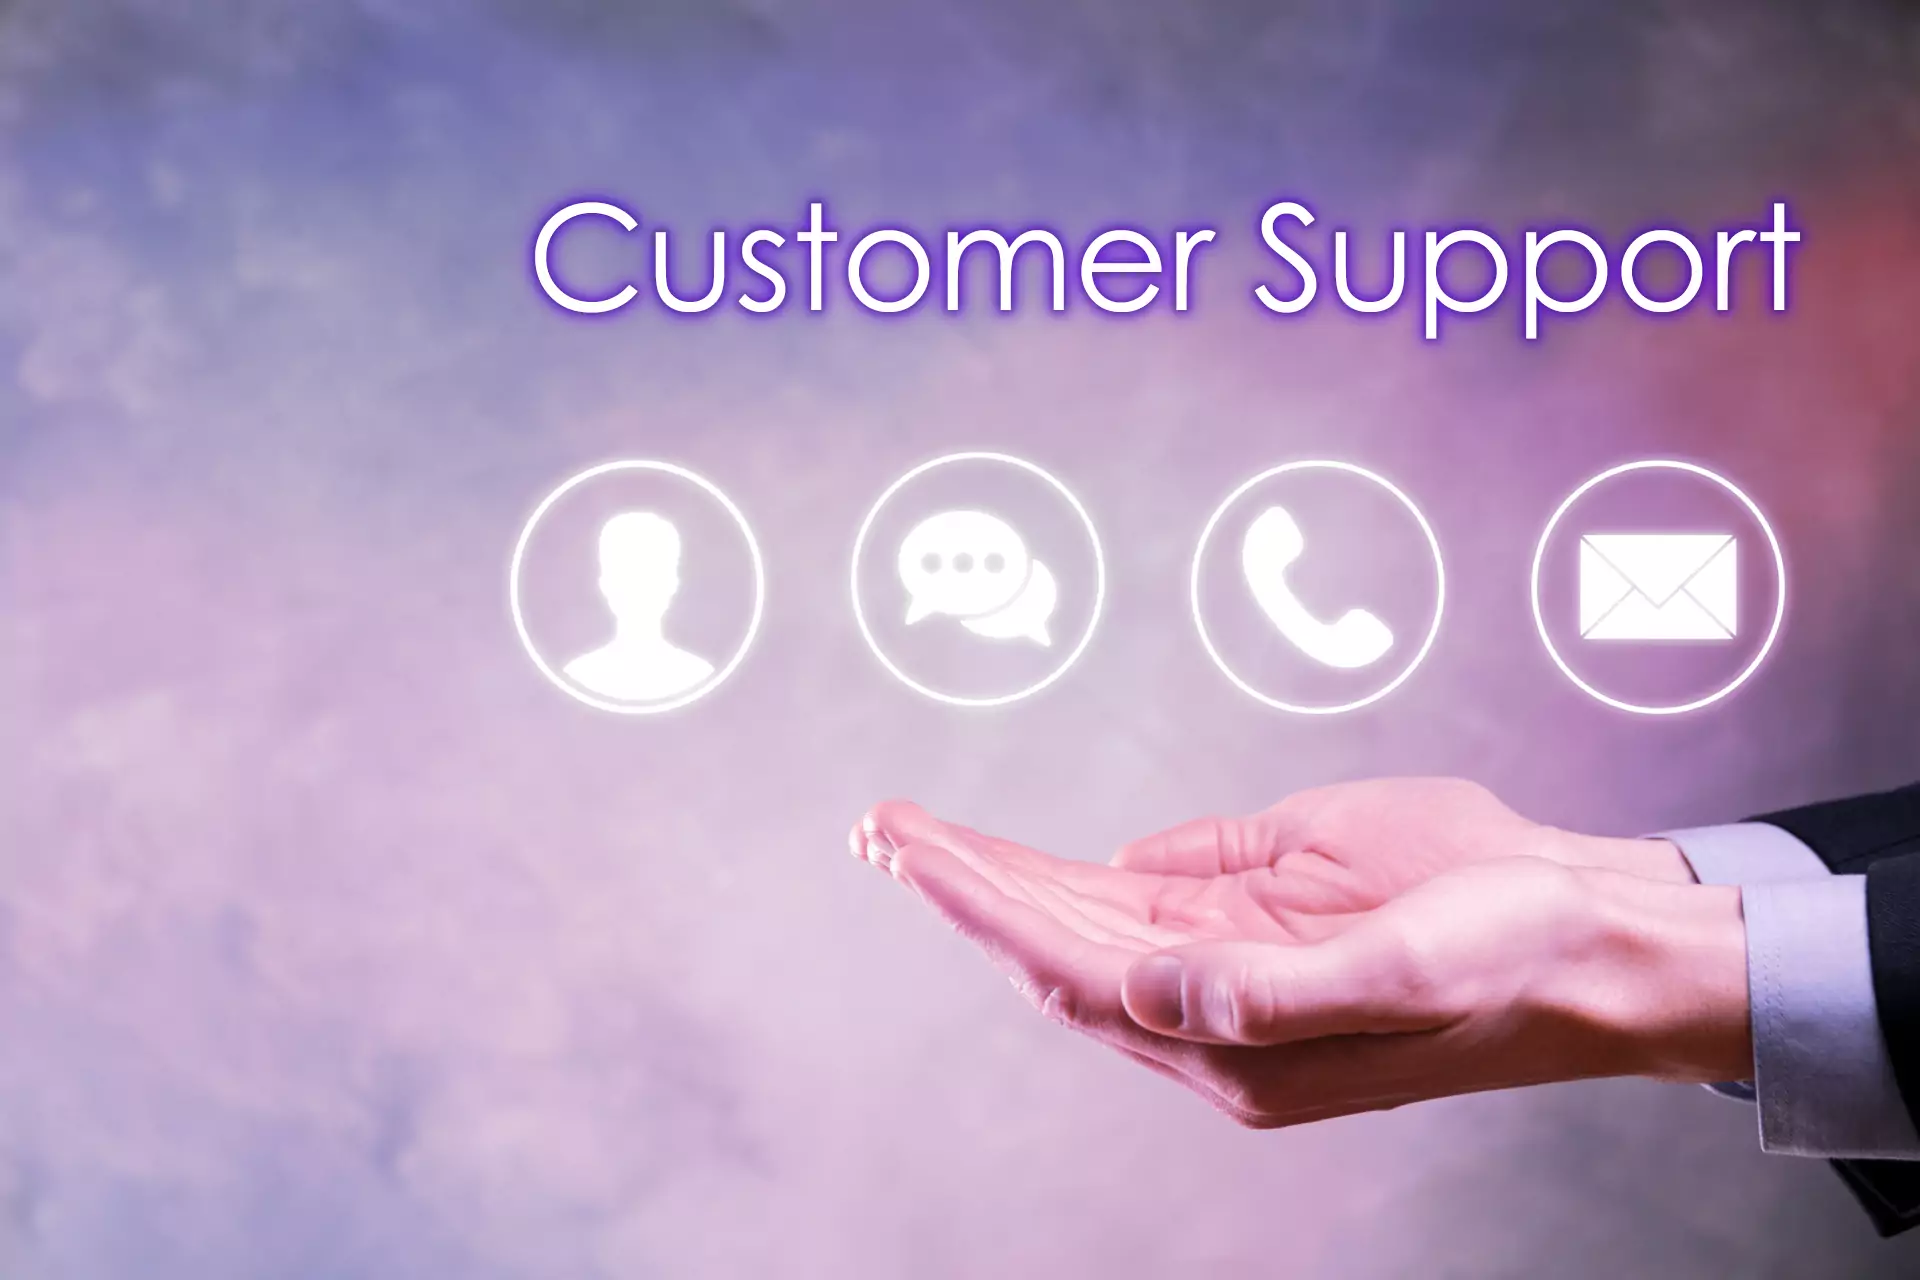 Customer Support works 24/7, so you can easily contact them at the site.